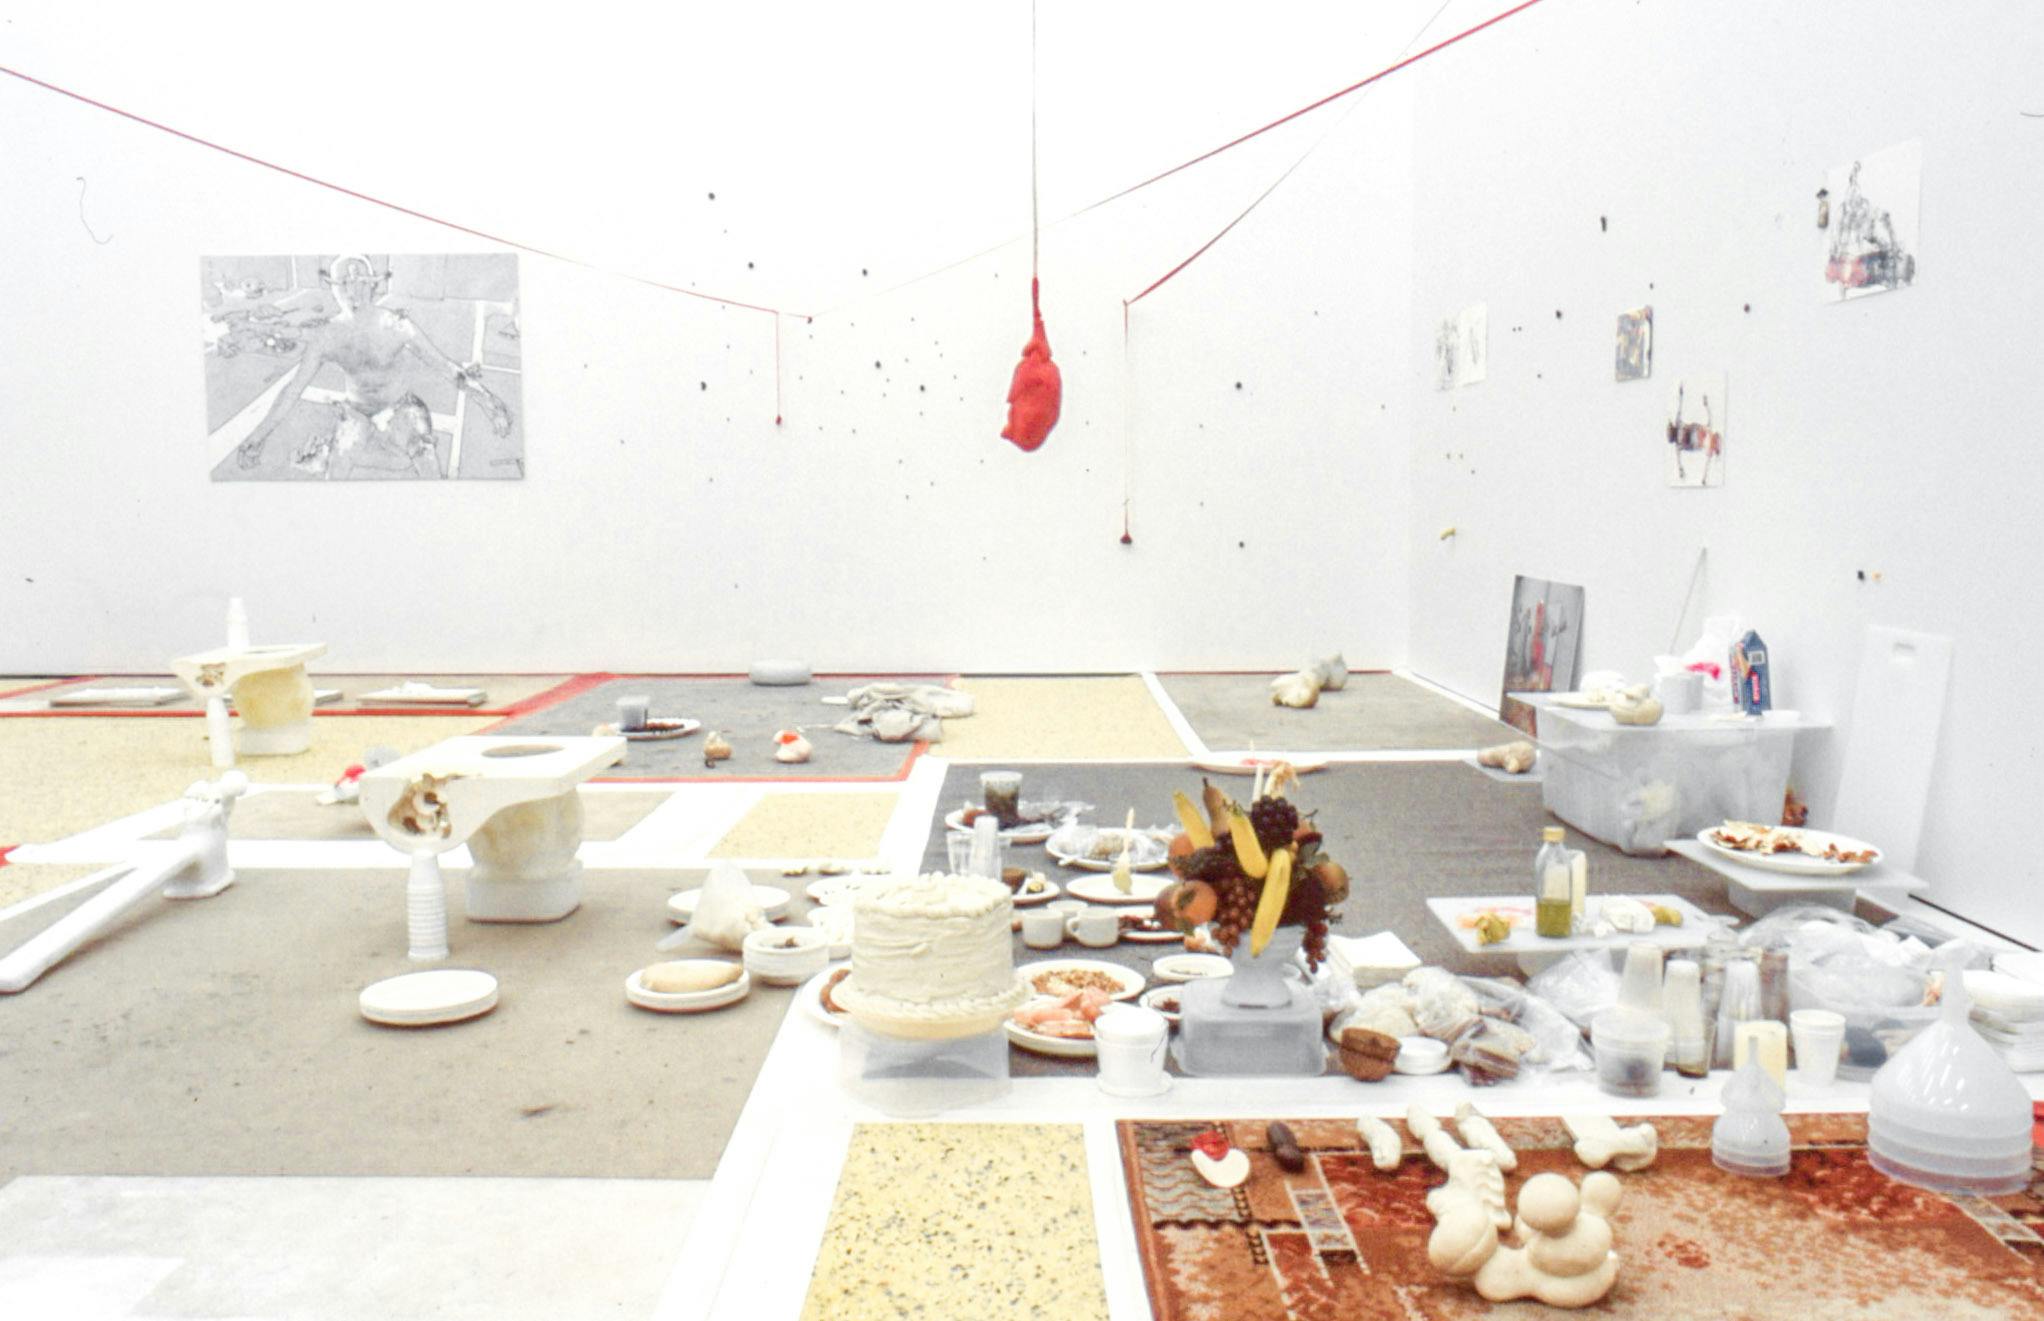 Installation image of artworks in a gallery. A variety of objects, including plastic cups, fruit, and sculptures are placed on the floor. The floor is partially covered with the patchwork of various carpets.